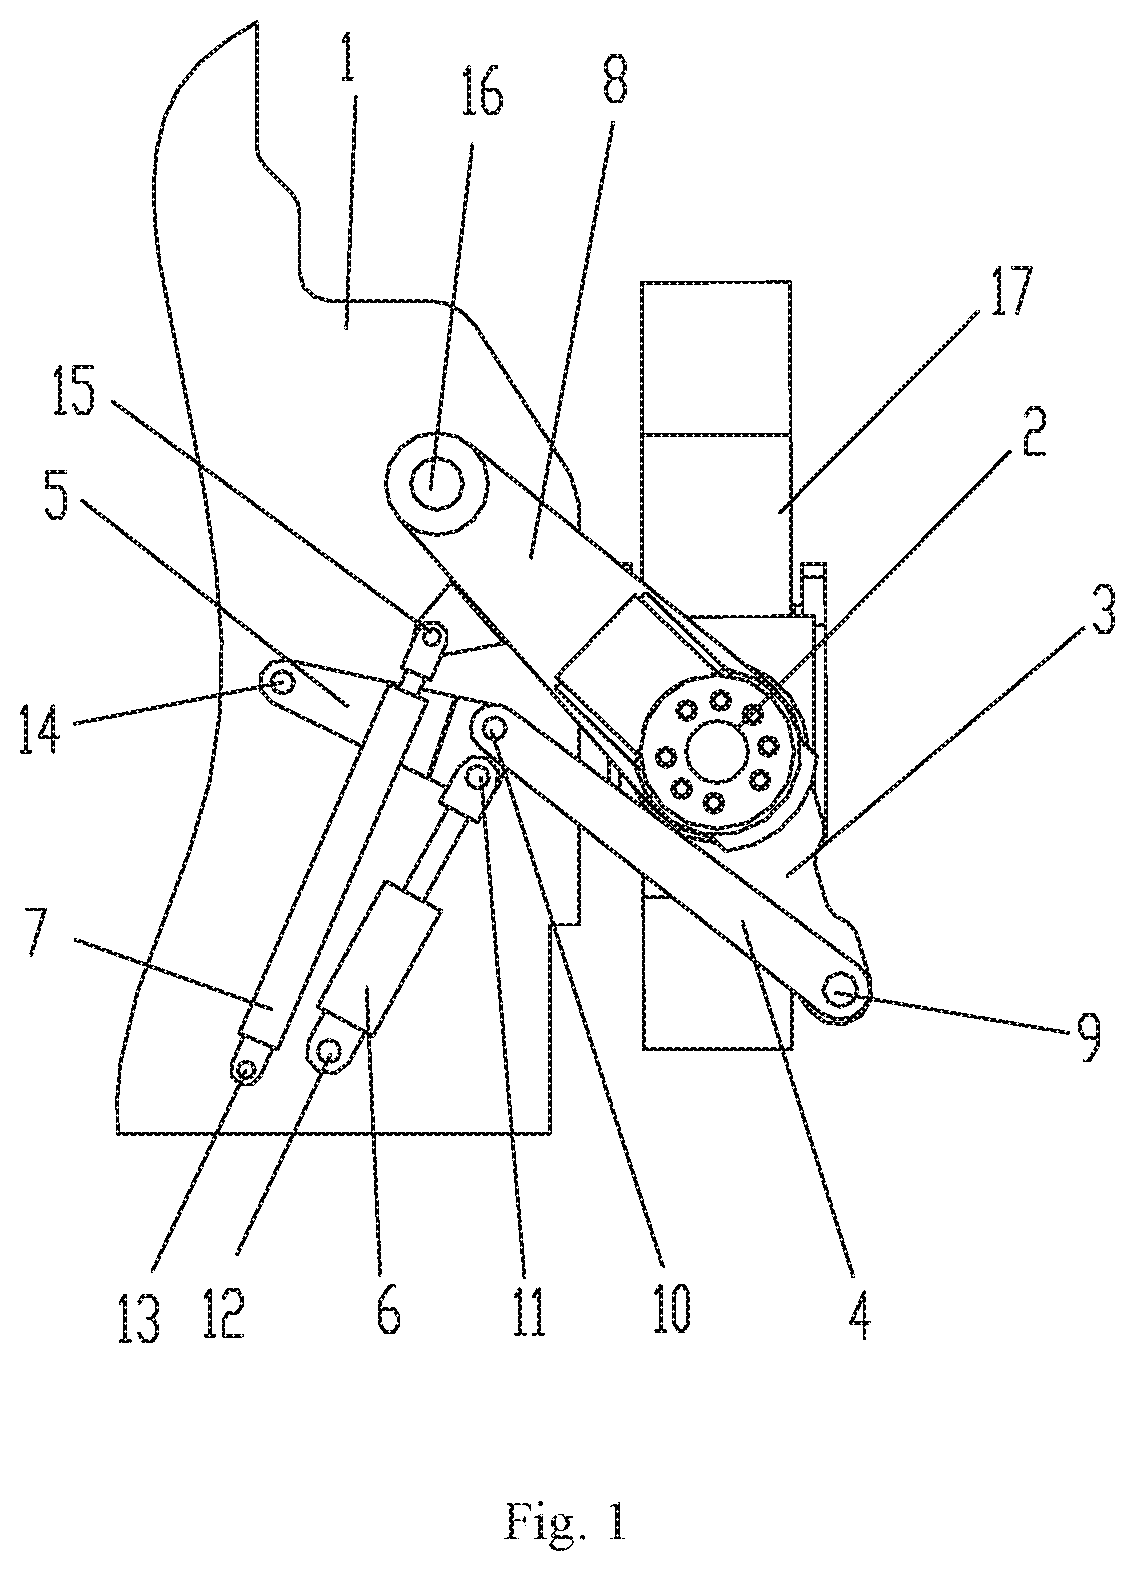 Mechanism for swinging and steering support leg for pavement milling machine